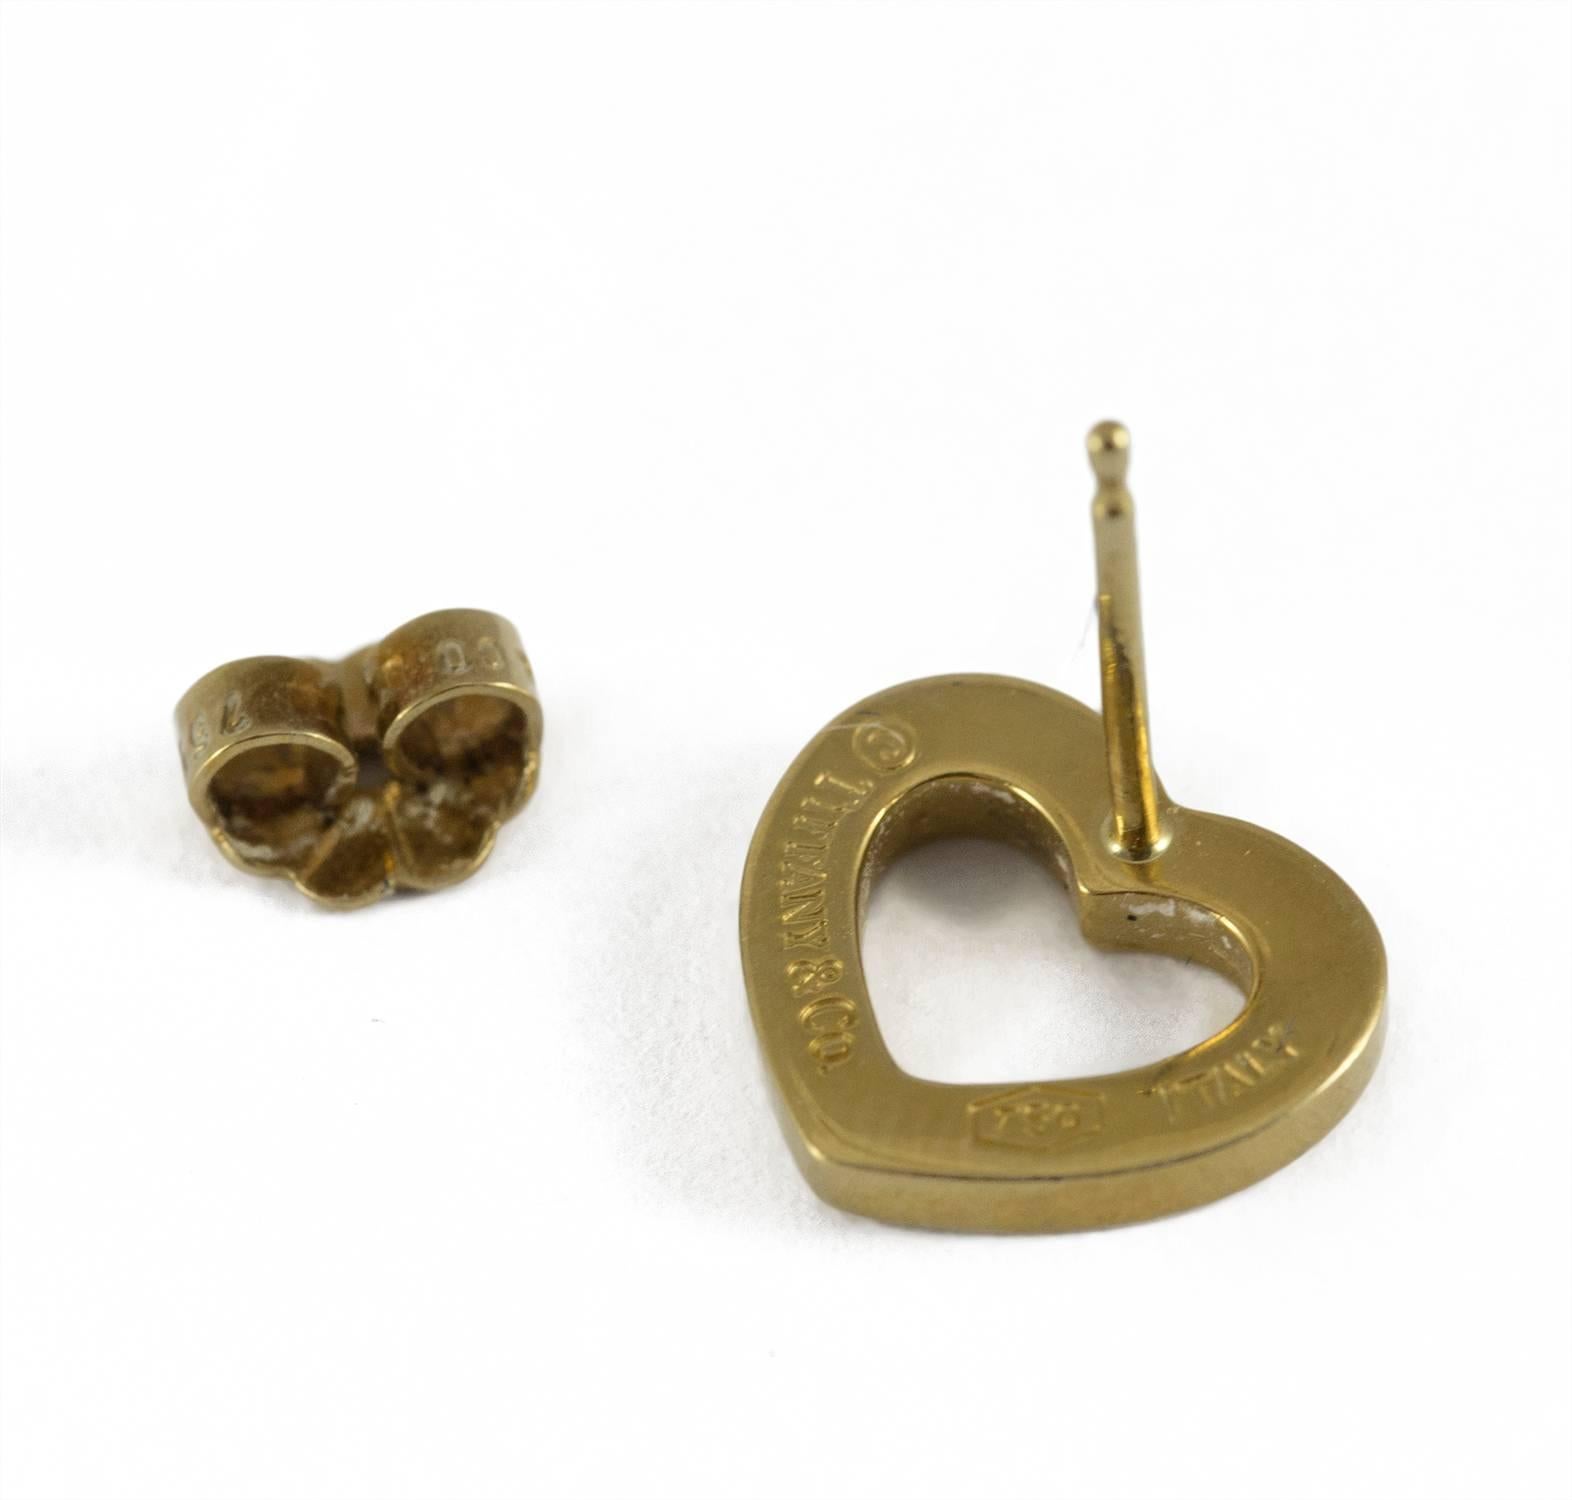 A dainty pair of Tiffany yellow gold open heart earrings. They are set in 18k yellow gold and are clearly stamped. They measure just under 1/2 inch in length and 1/2 inch in width.  These earrings are in excellent condition.